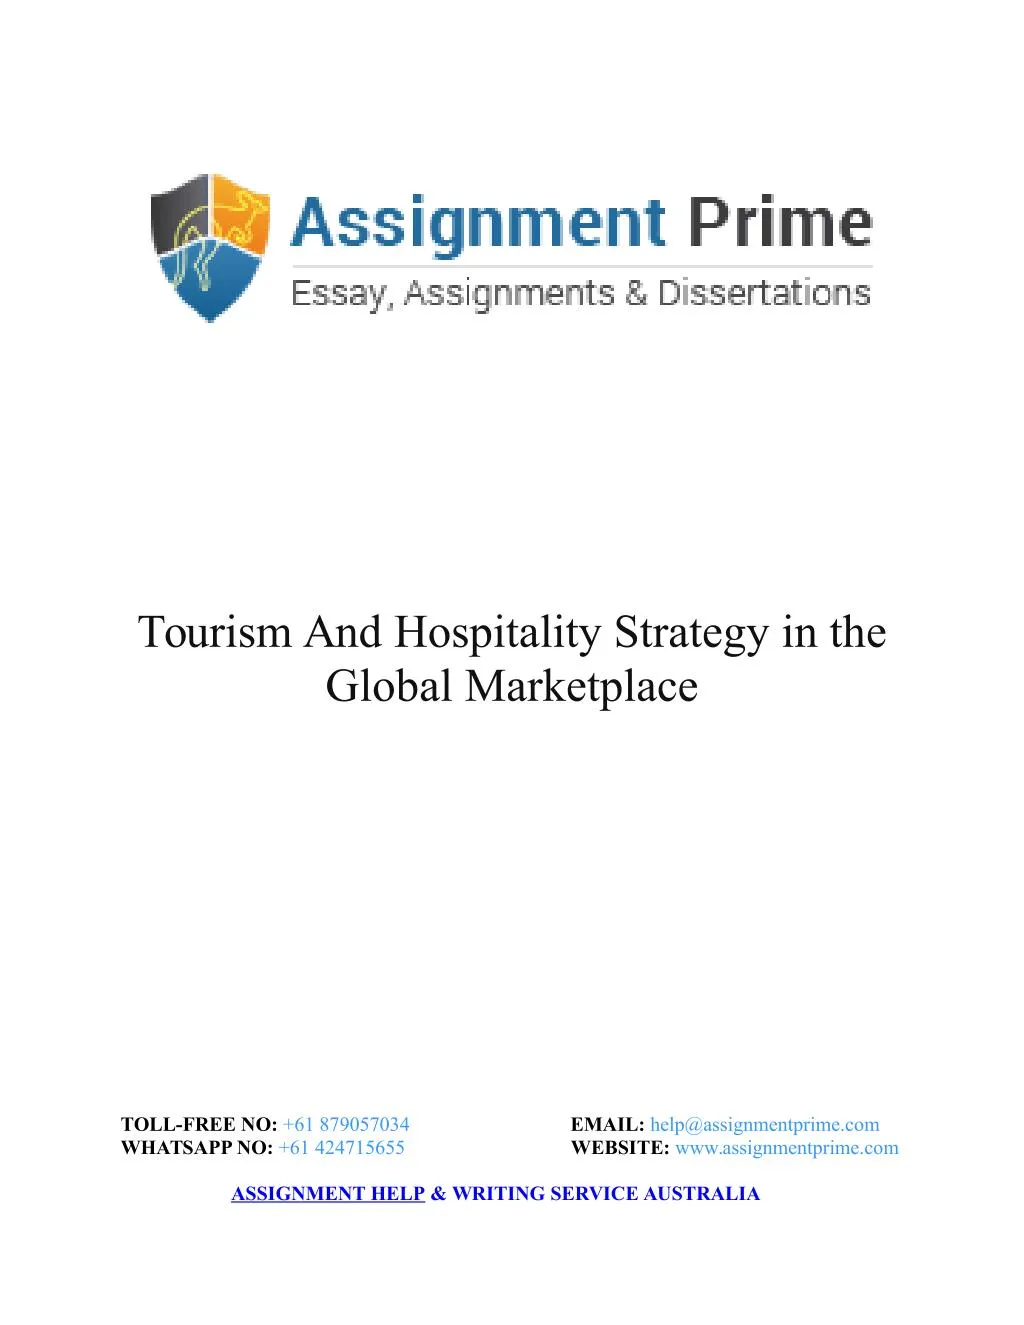 Tourism And Hospitality Strategy in the Global Marketplace